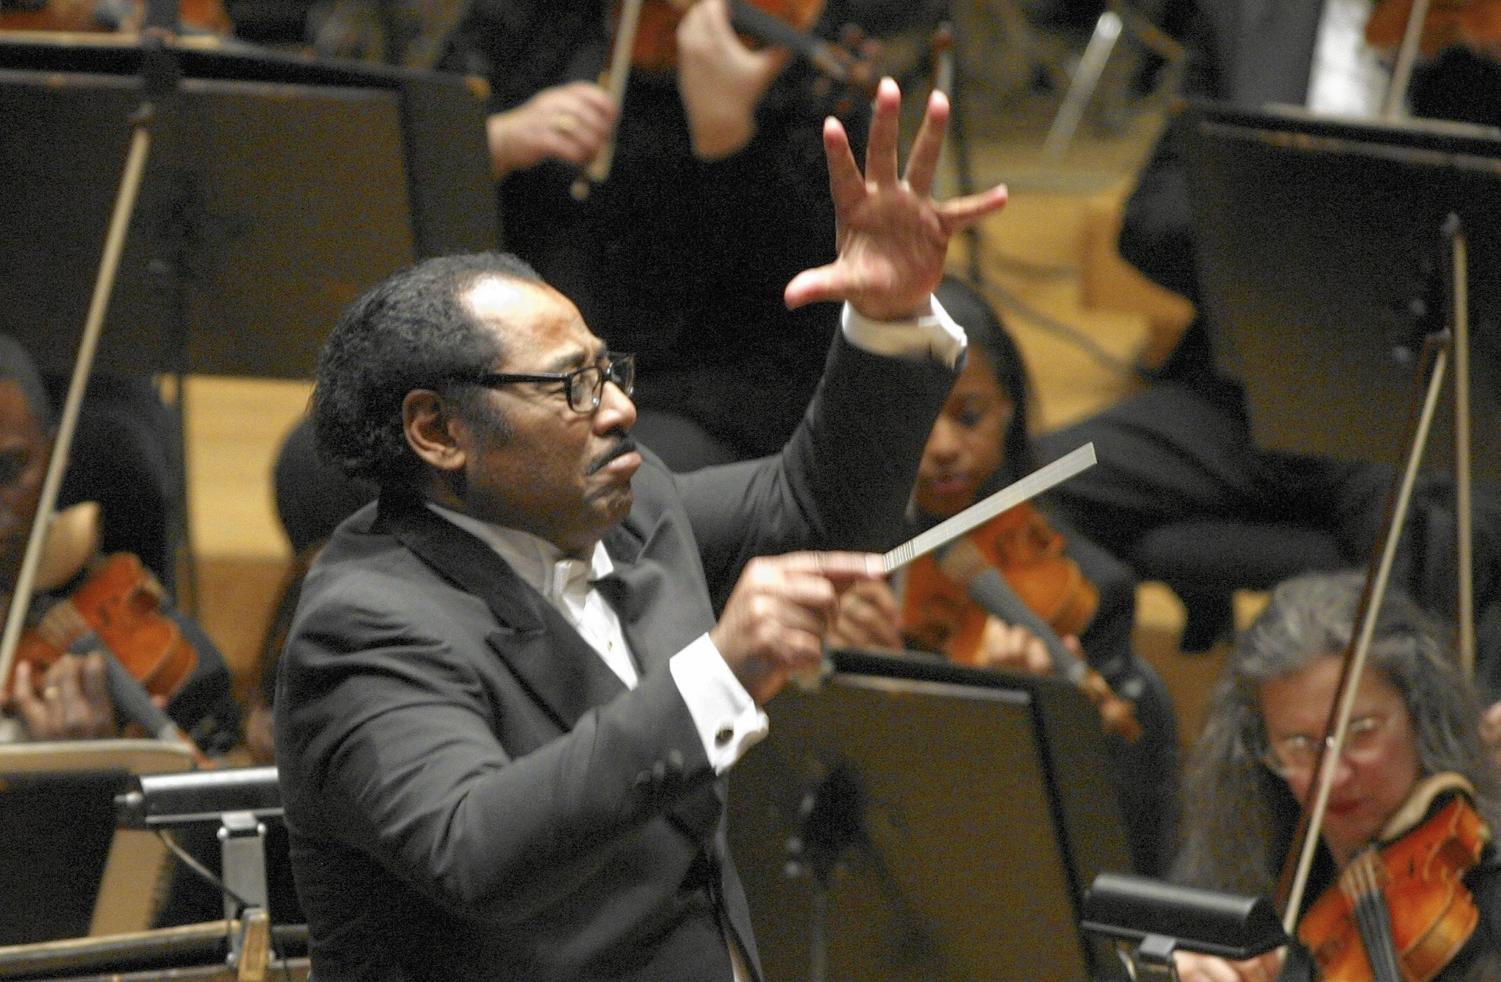 Chicago Sinfonietta conductor and founder Paul Freeman, who died July 21, was memorialized at Monday's concert. 